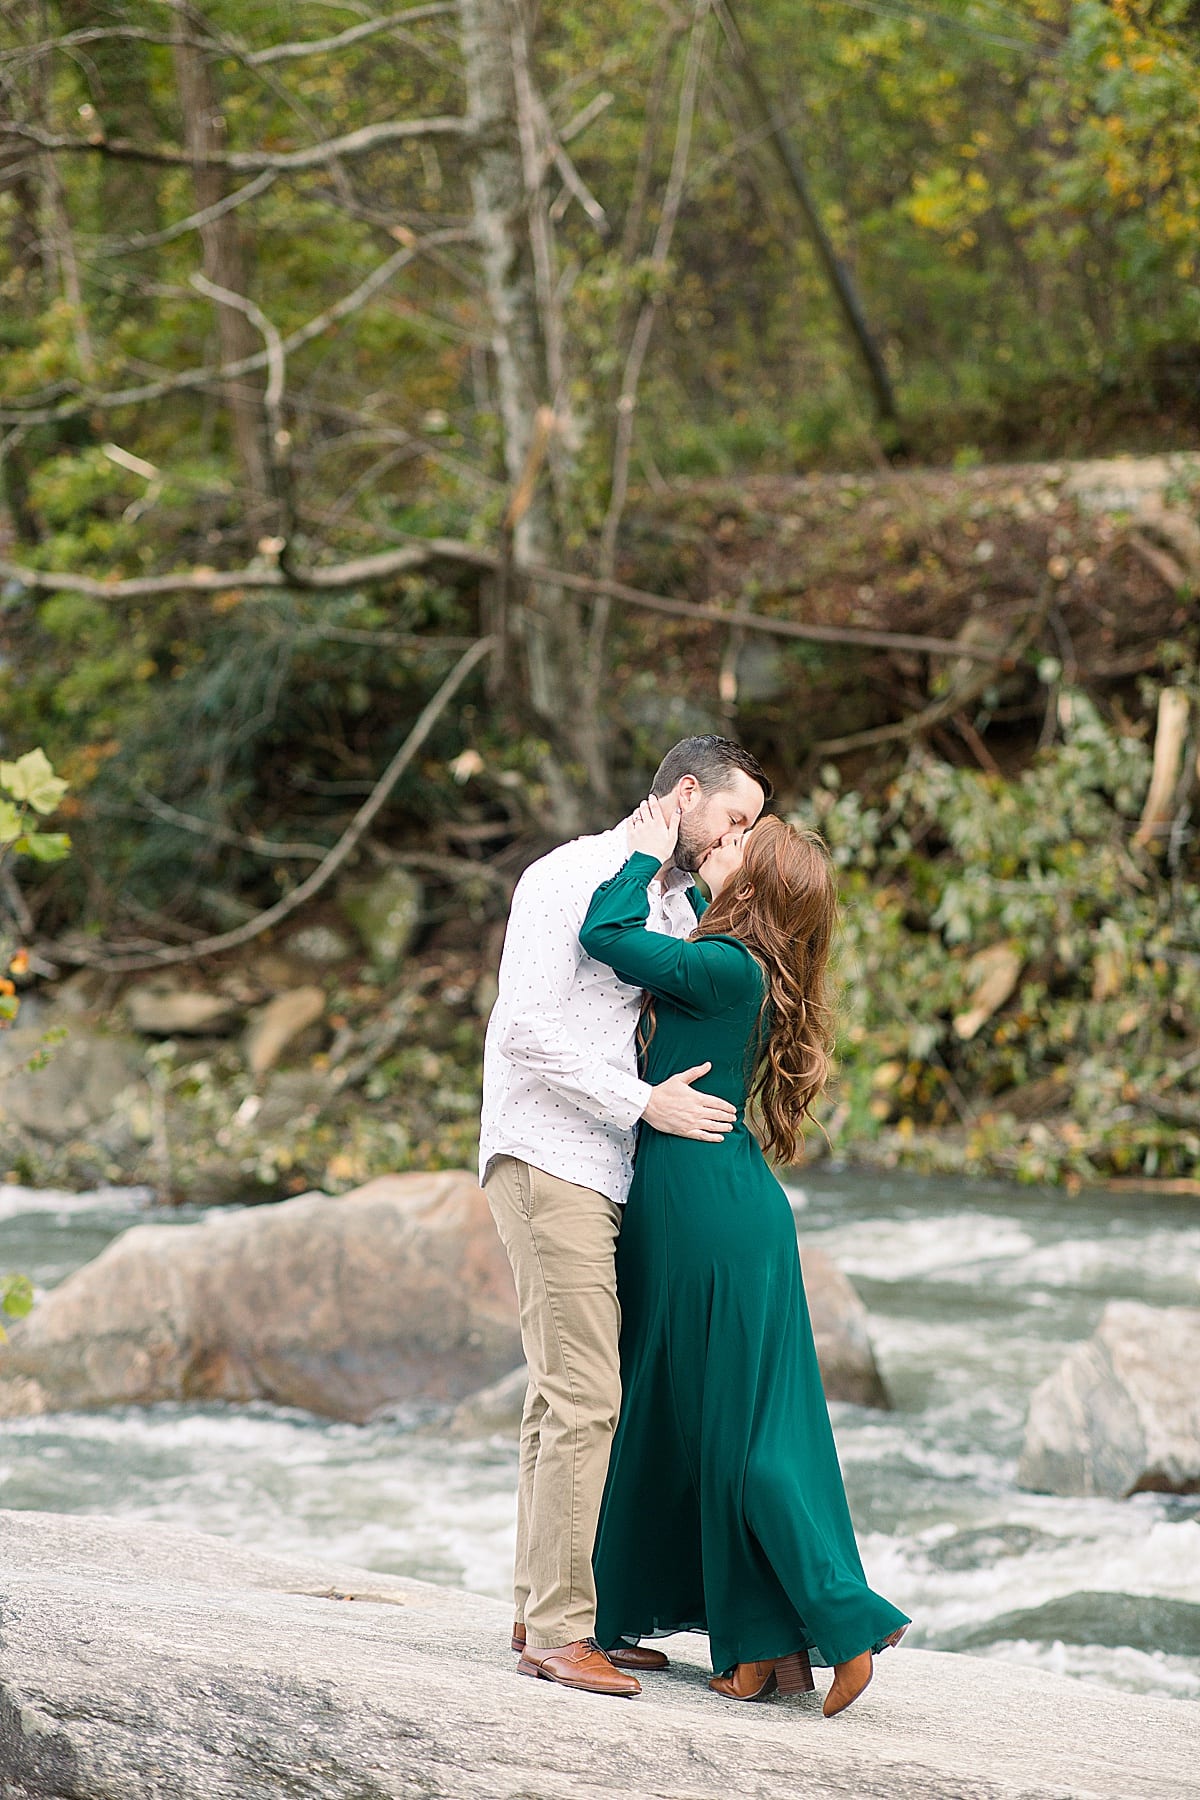 Couple Kissing on A Rock in the Broad River Photo